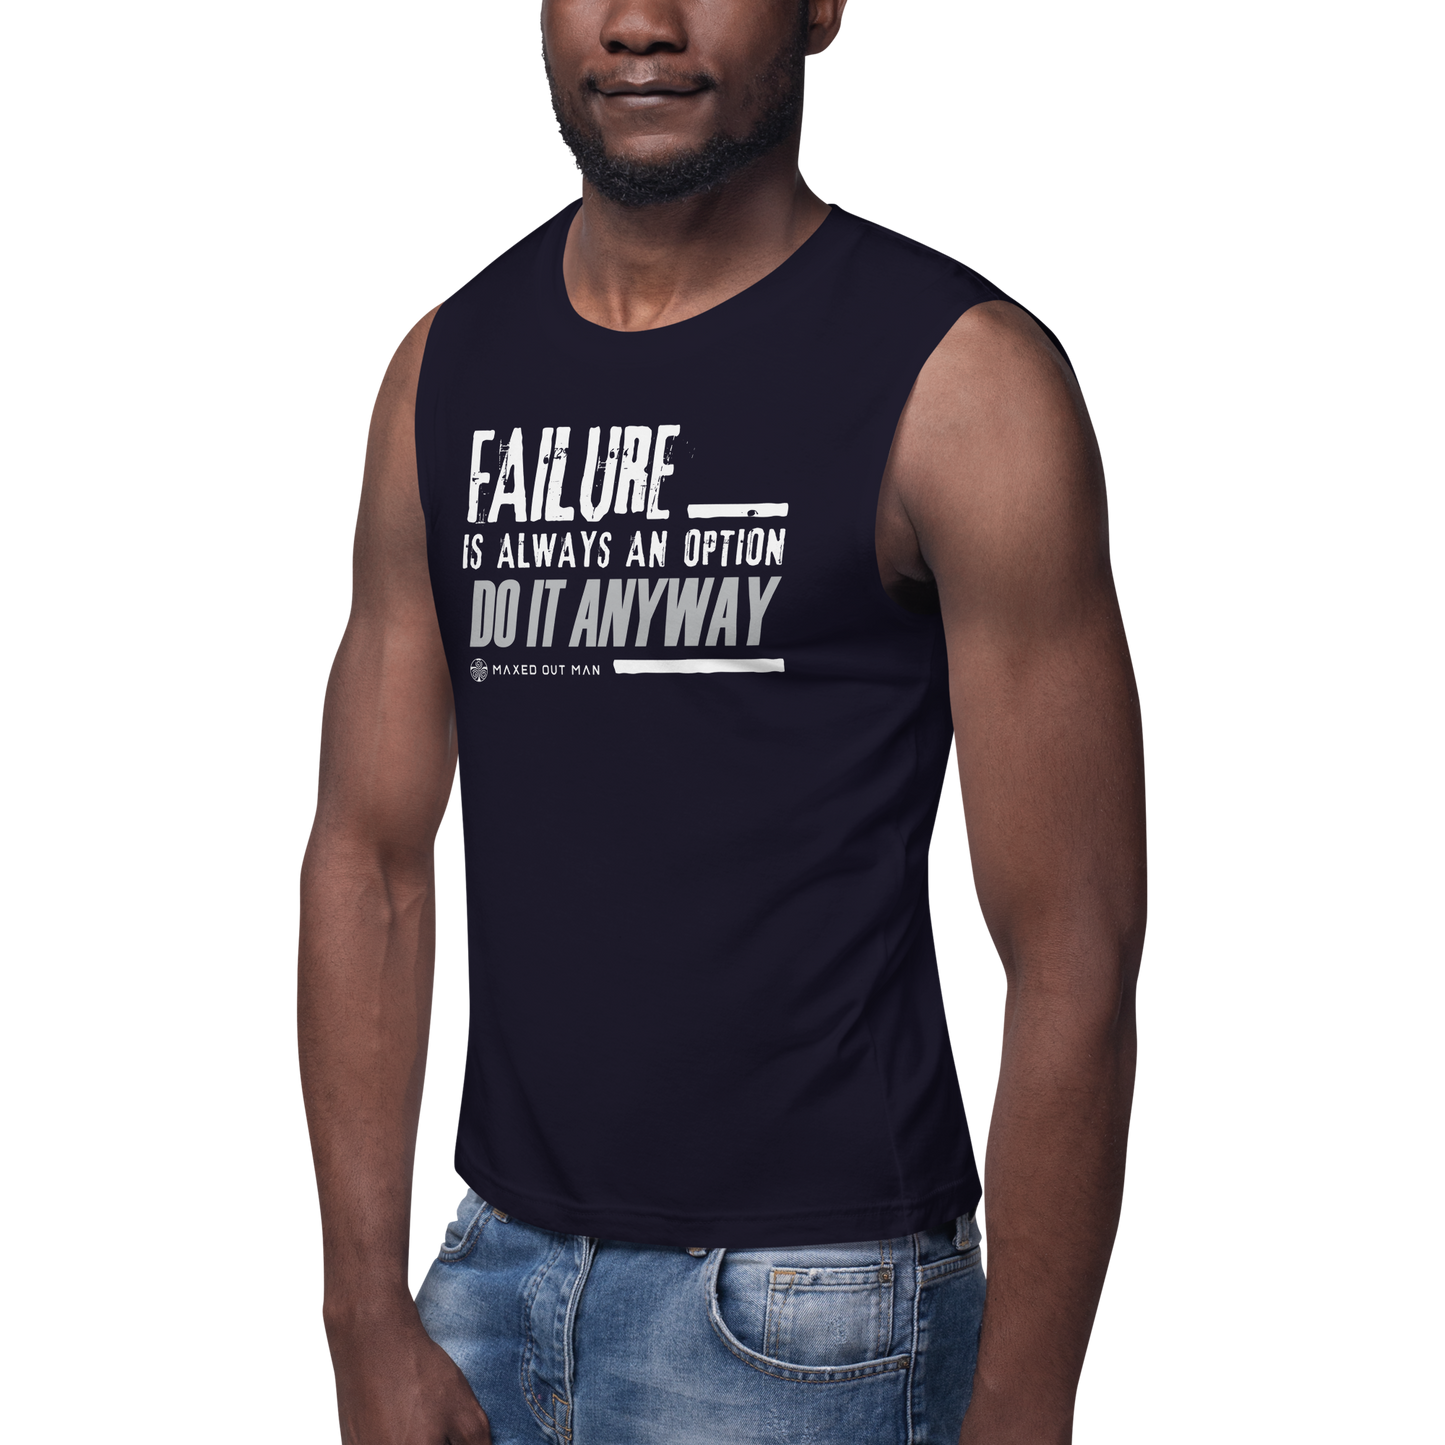 Failure is Always an Option Muscle Shirt - Darker Colors